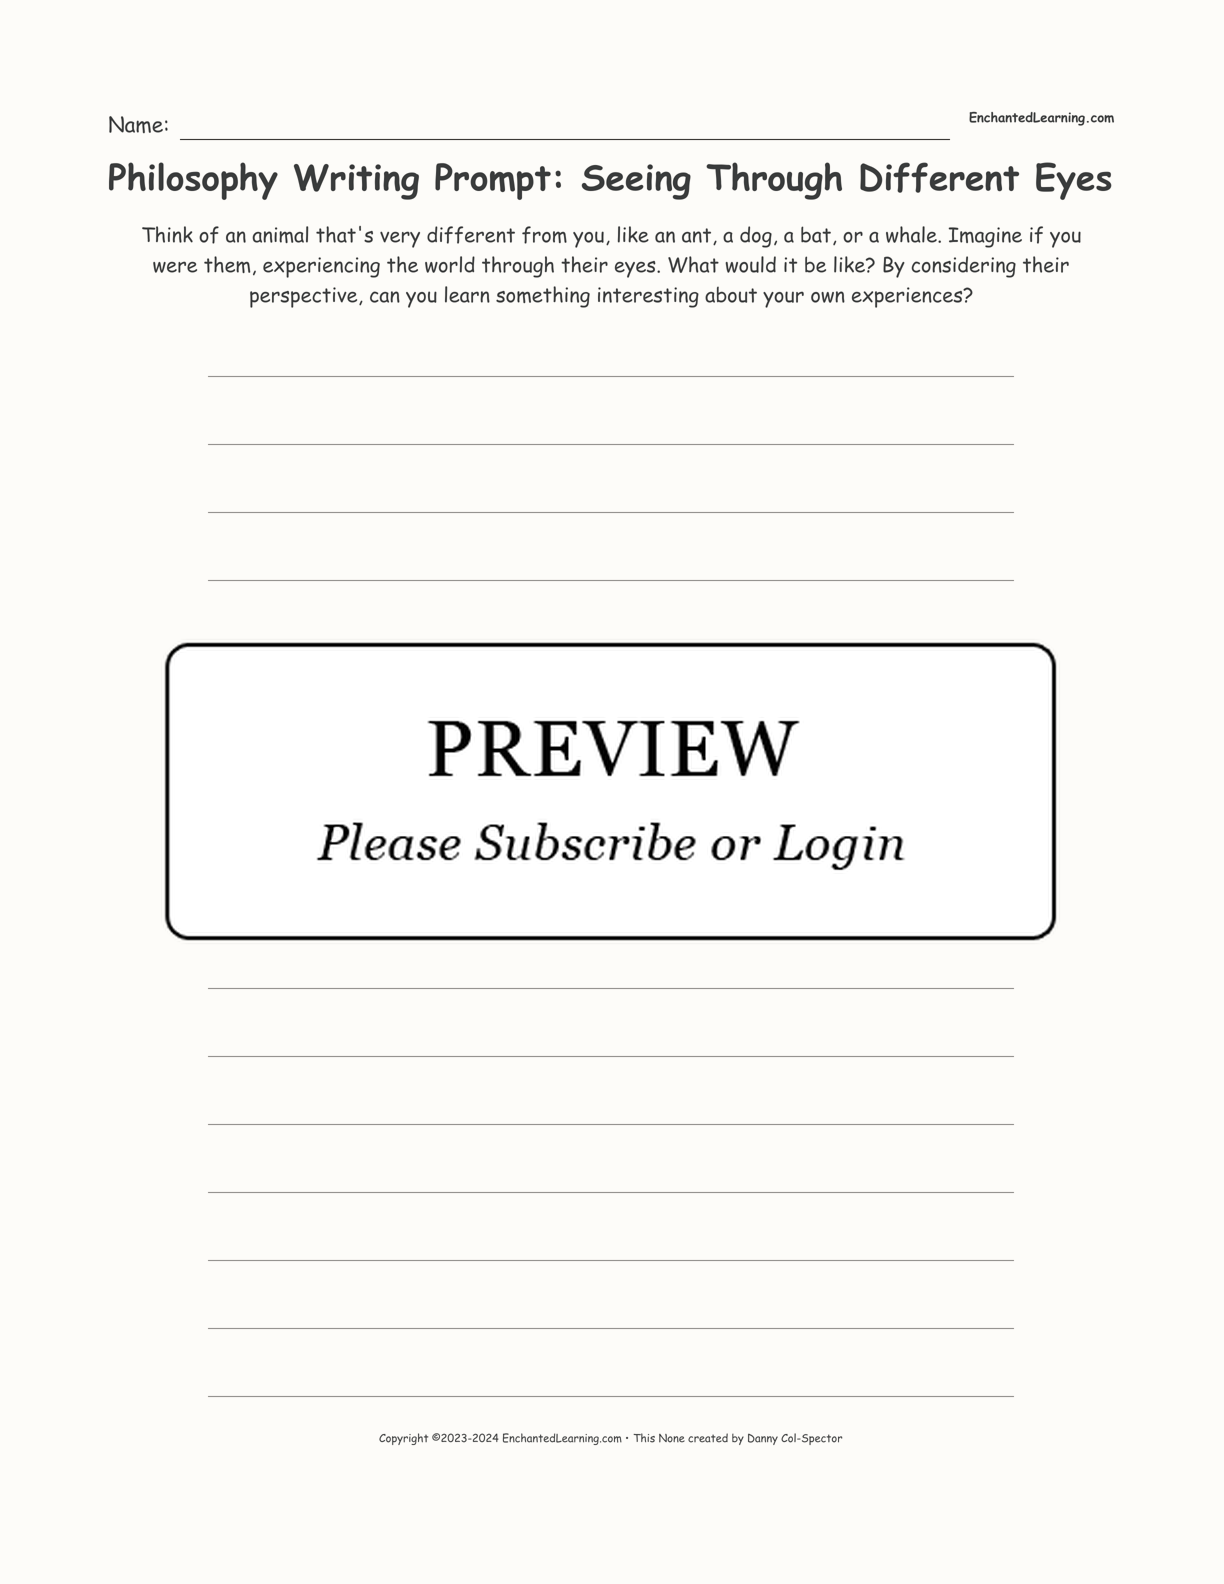 Philosophy Writing Prompt: Seeing Through Different Eyes interactive printout page 1